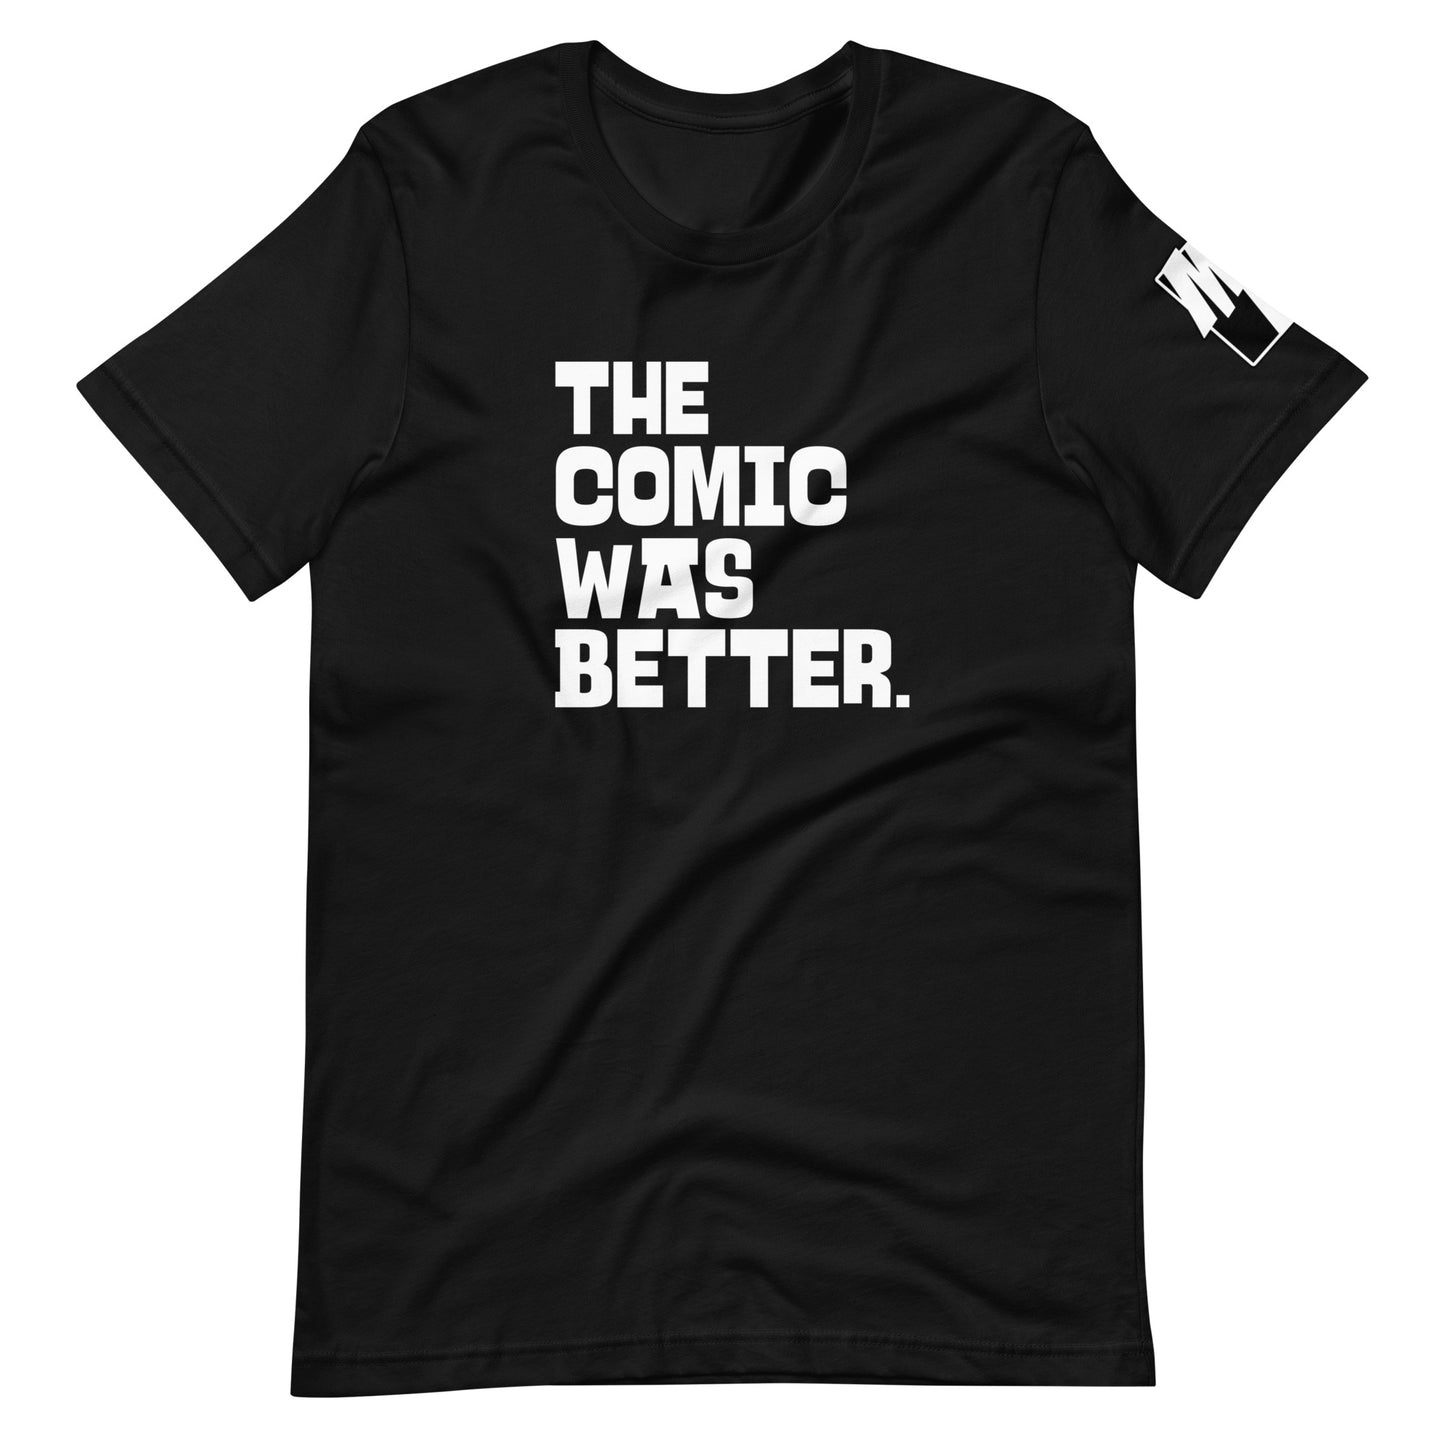 The Comic was Better T-Shirt